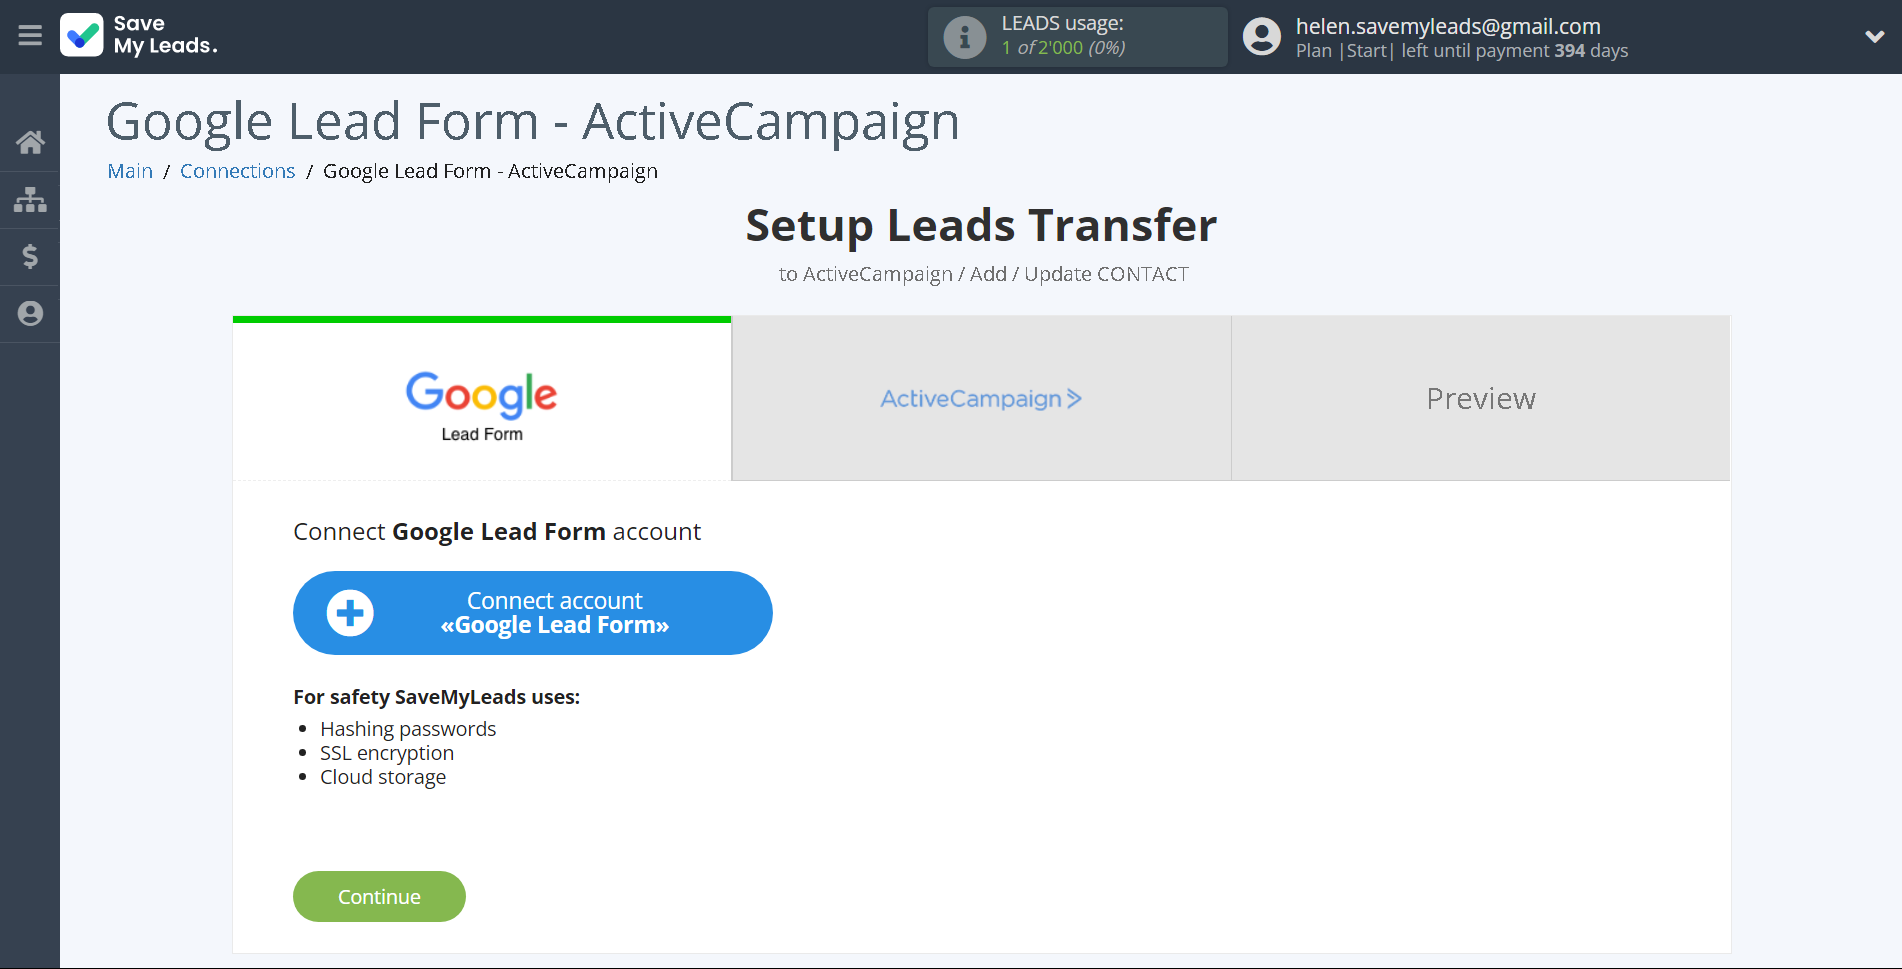 How to Connect Google Lead Form with ActiveCampaign Create Contacts | Data Source account